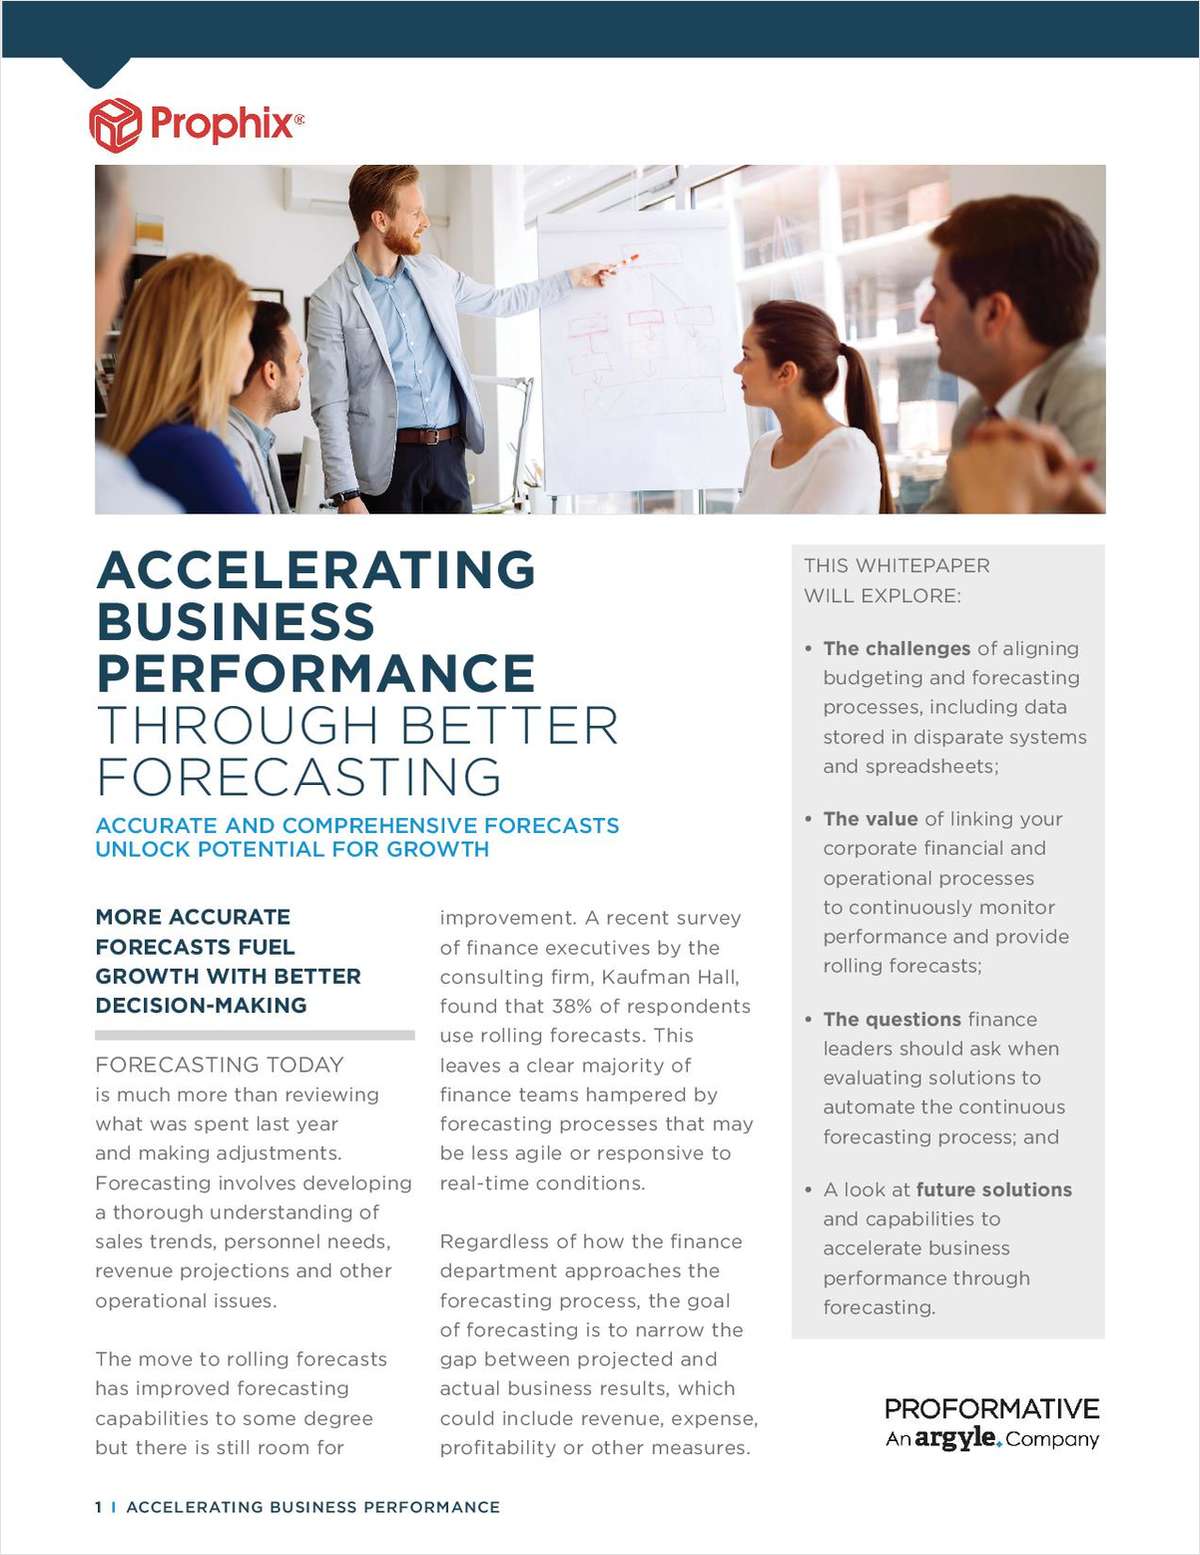 Accelerating Performance Through Better Forecasting